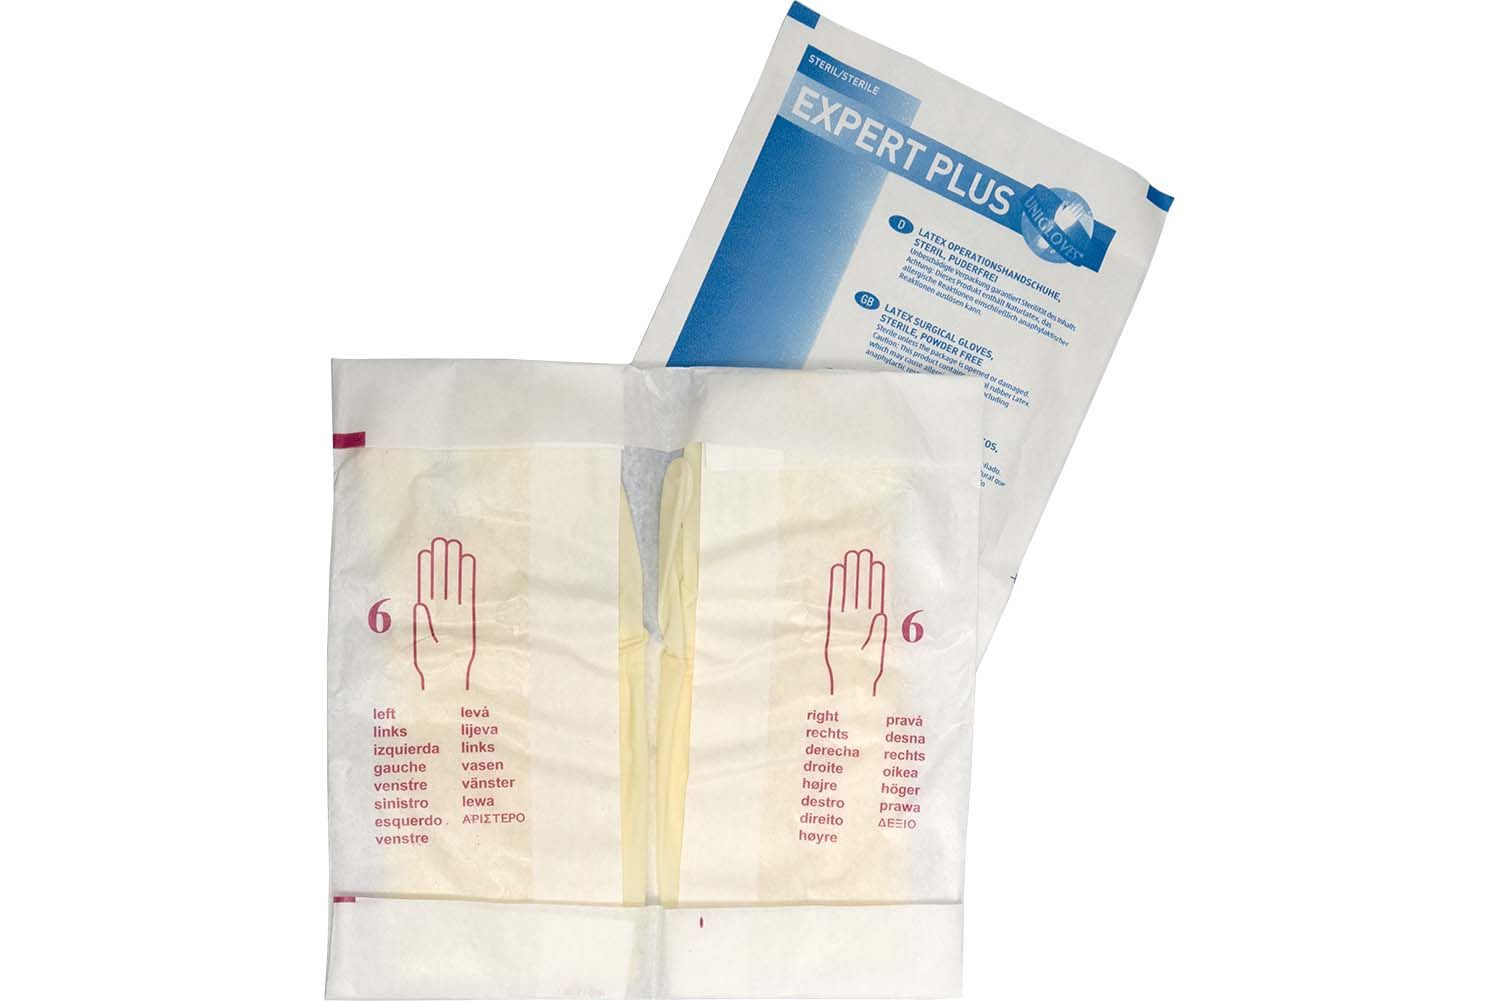 Latex gloves sterile and powder-free - white